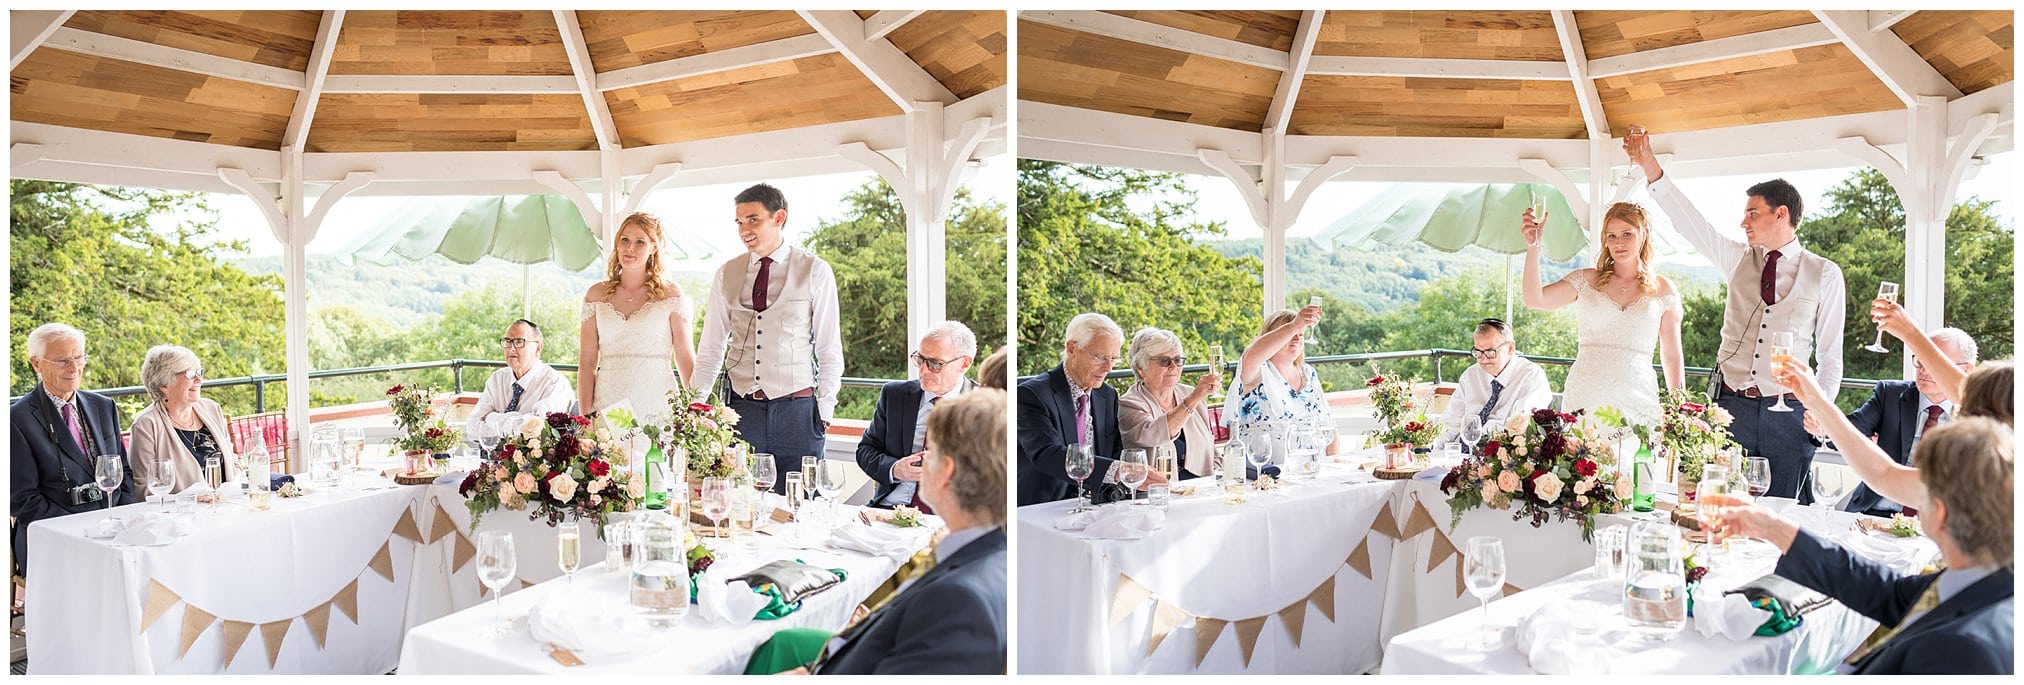 bride and groom give a joint speech at their wedding at caer llan in monmouth.